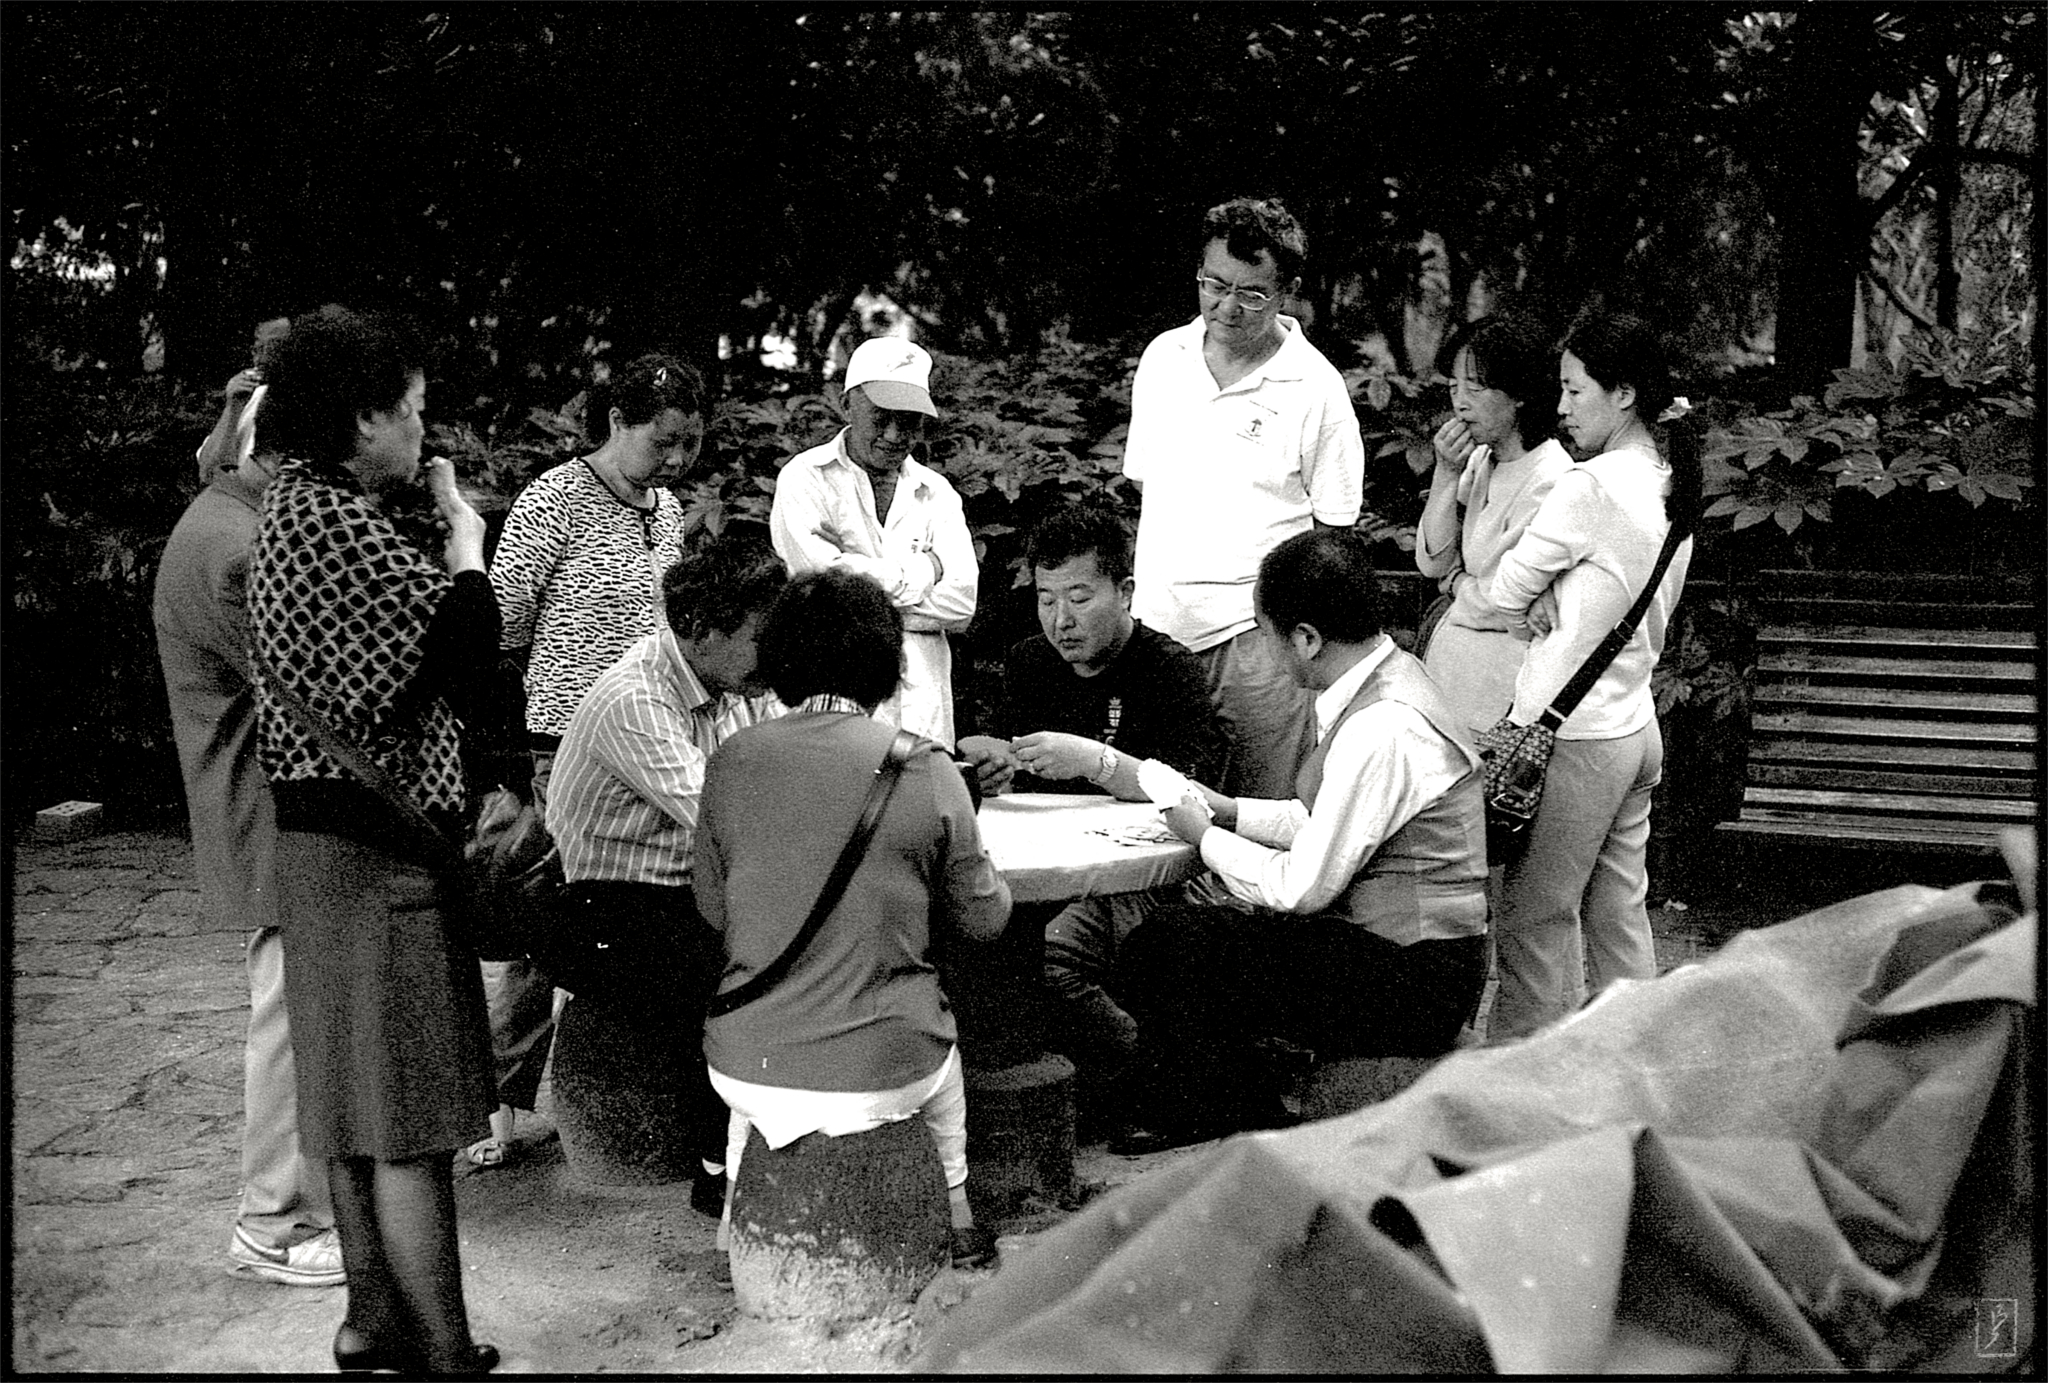 Lu Xun park (鲁迅公园): People watching others play cards.